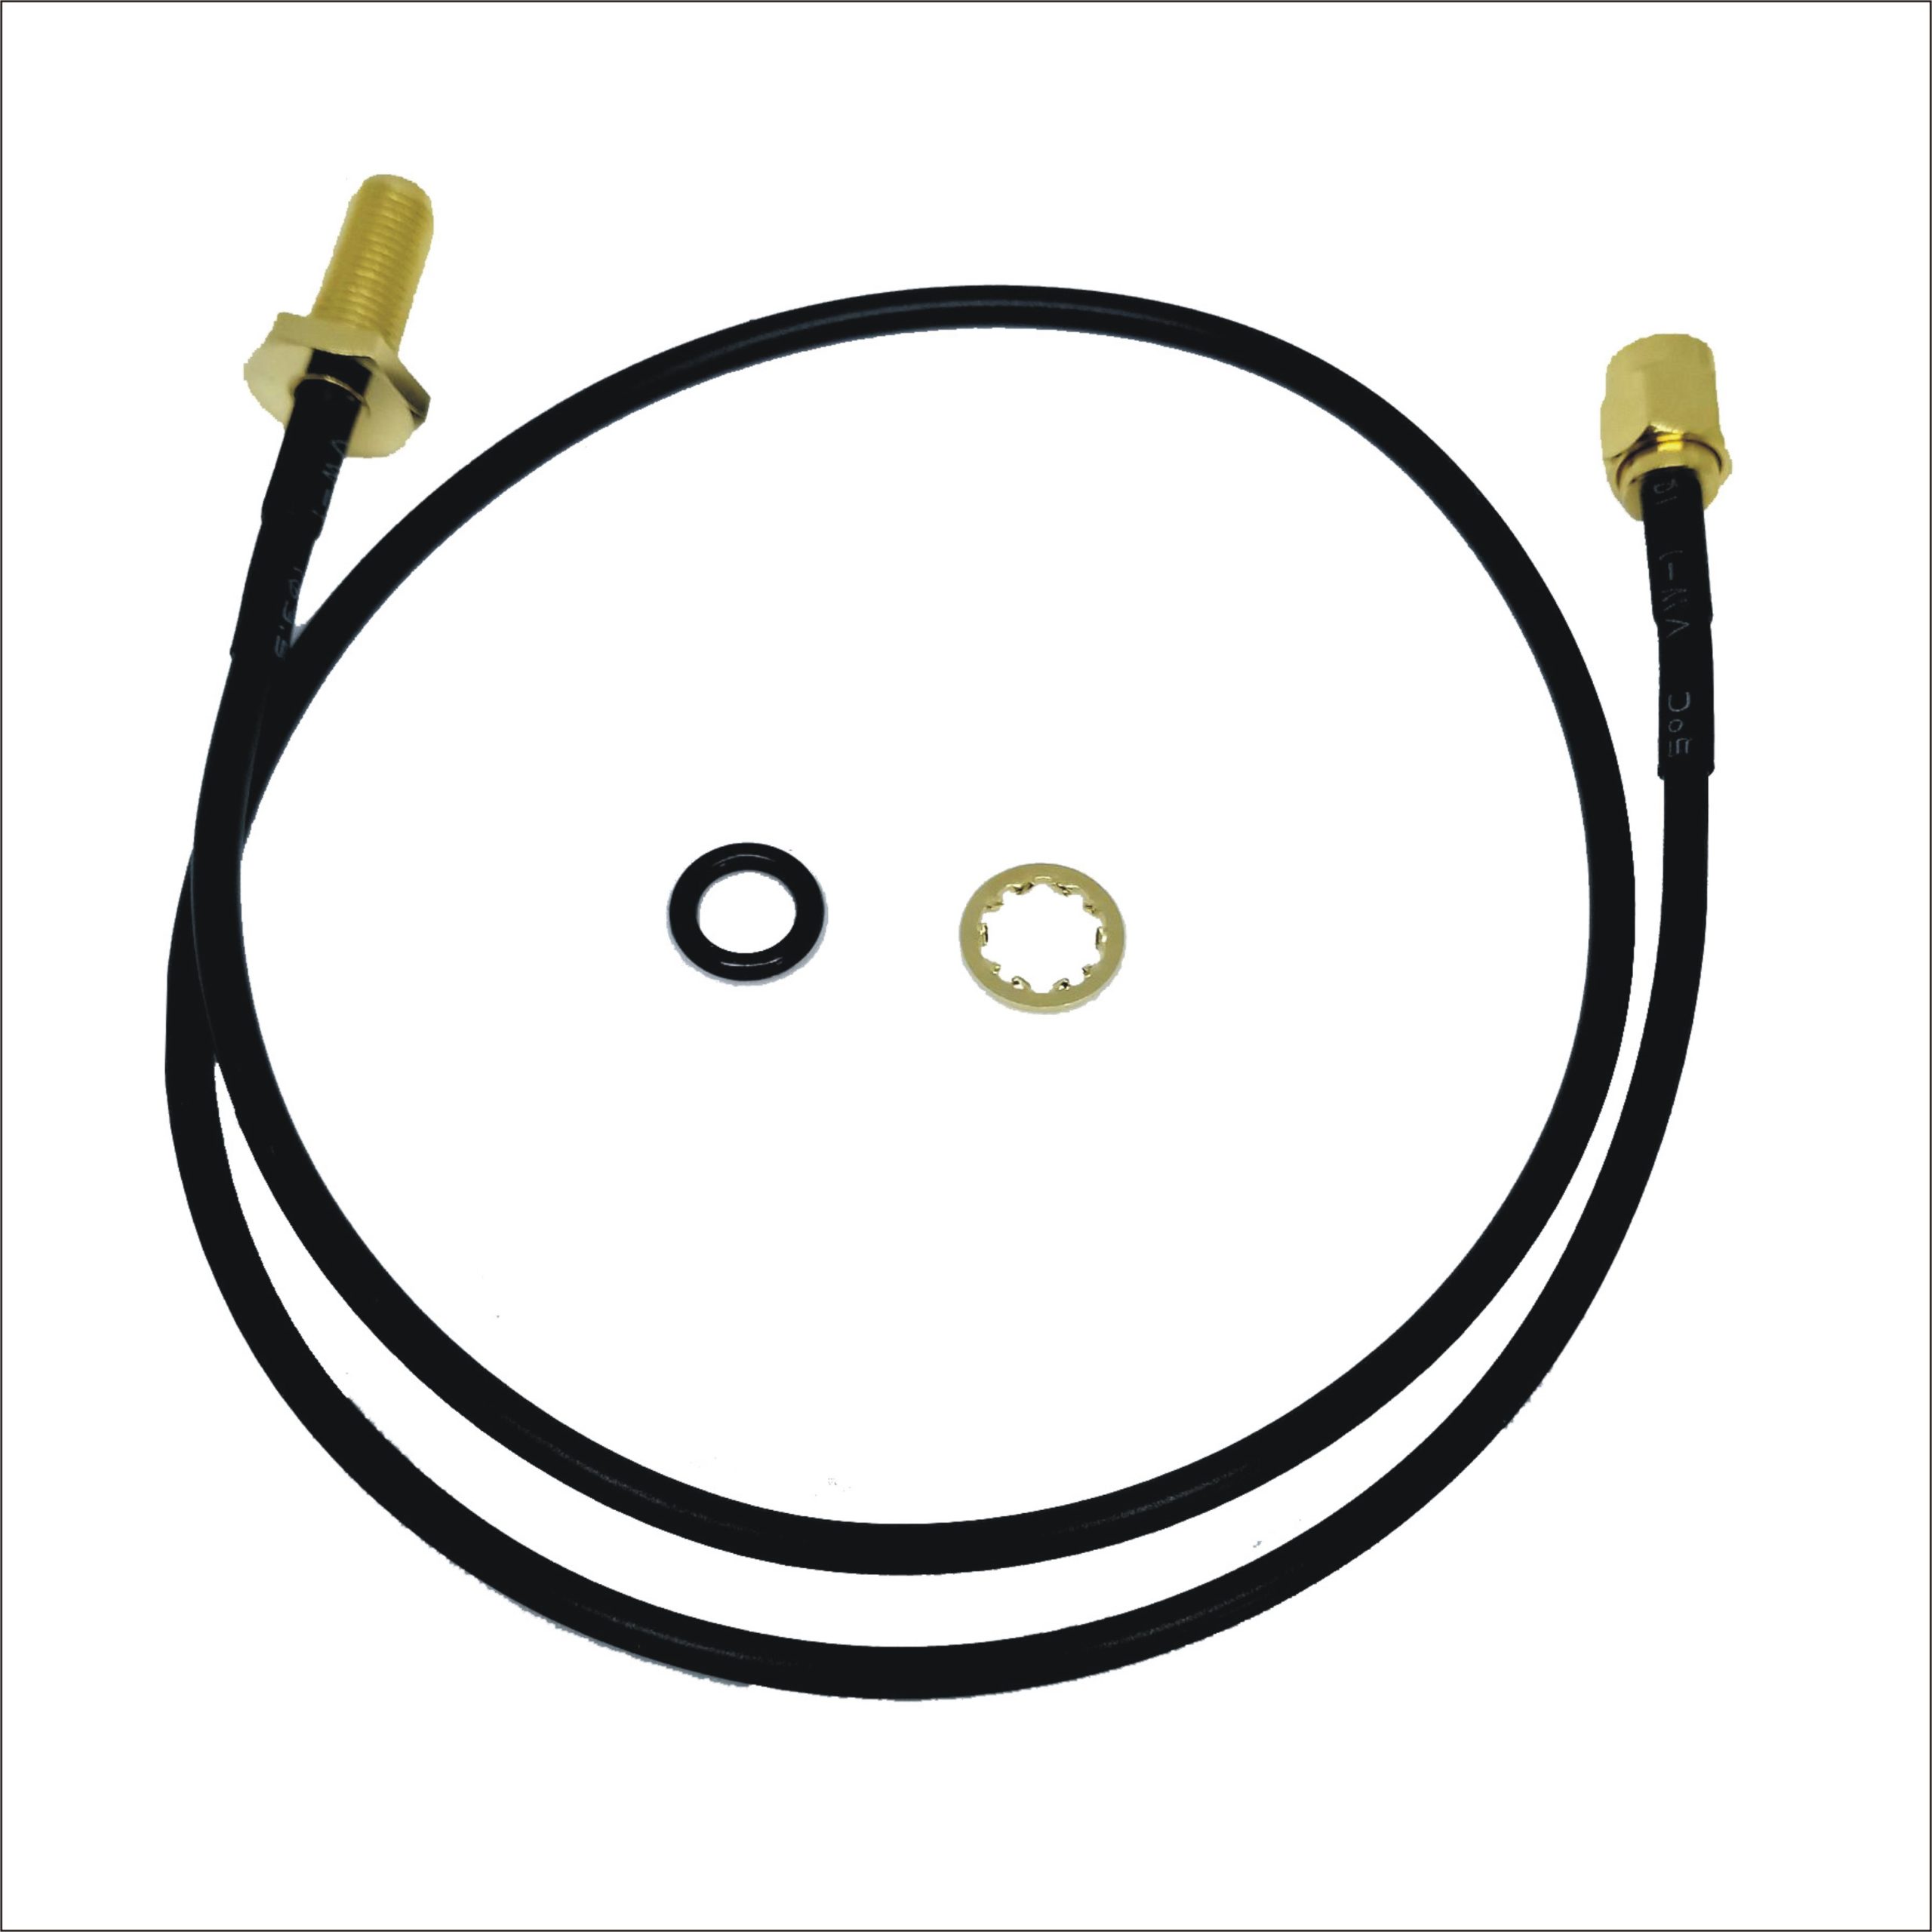 SMA R/P JACK TO SMA PLUG RG174 Cable assembly with o’ring on the antenna leads